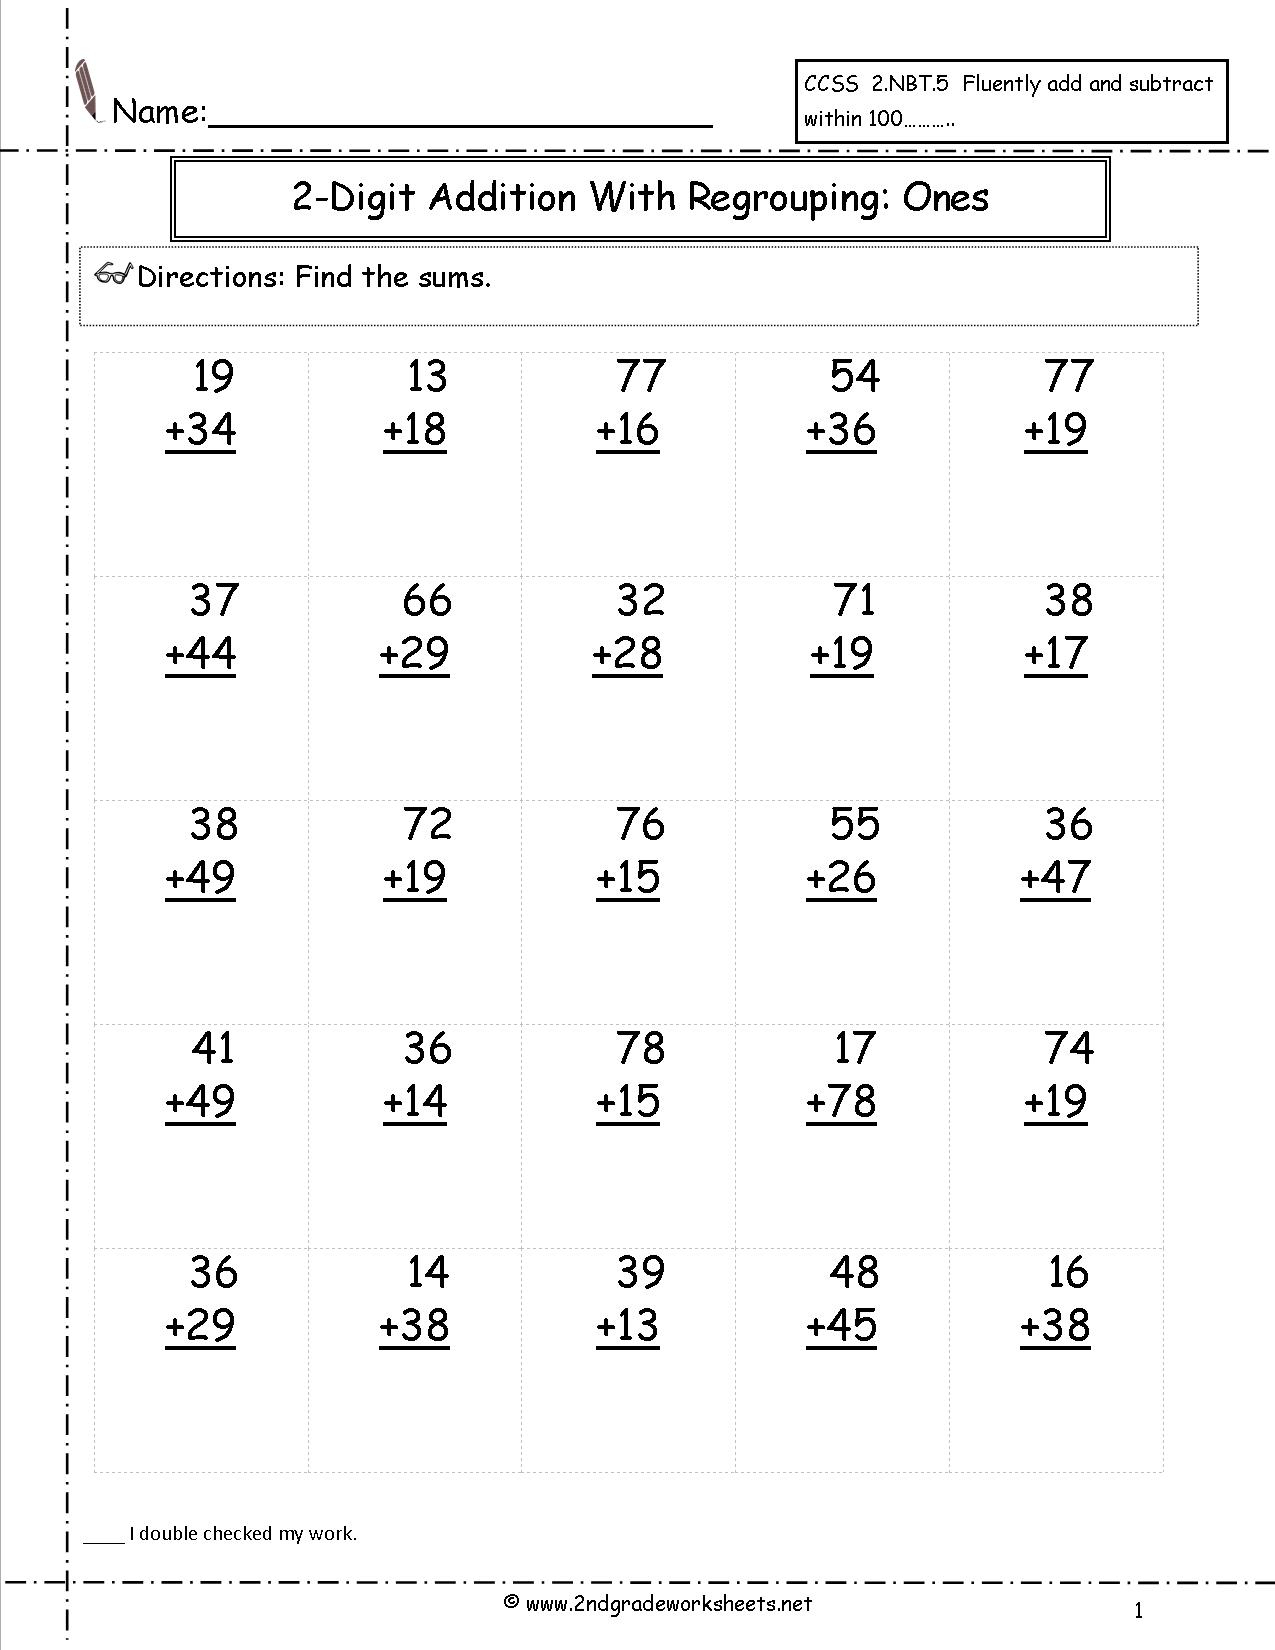 Free Math Worksheets And Printouts - Free Printable Subtraction | Printable Subtraction Worksheets